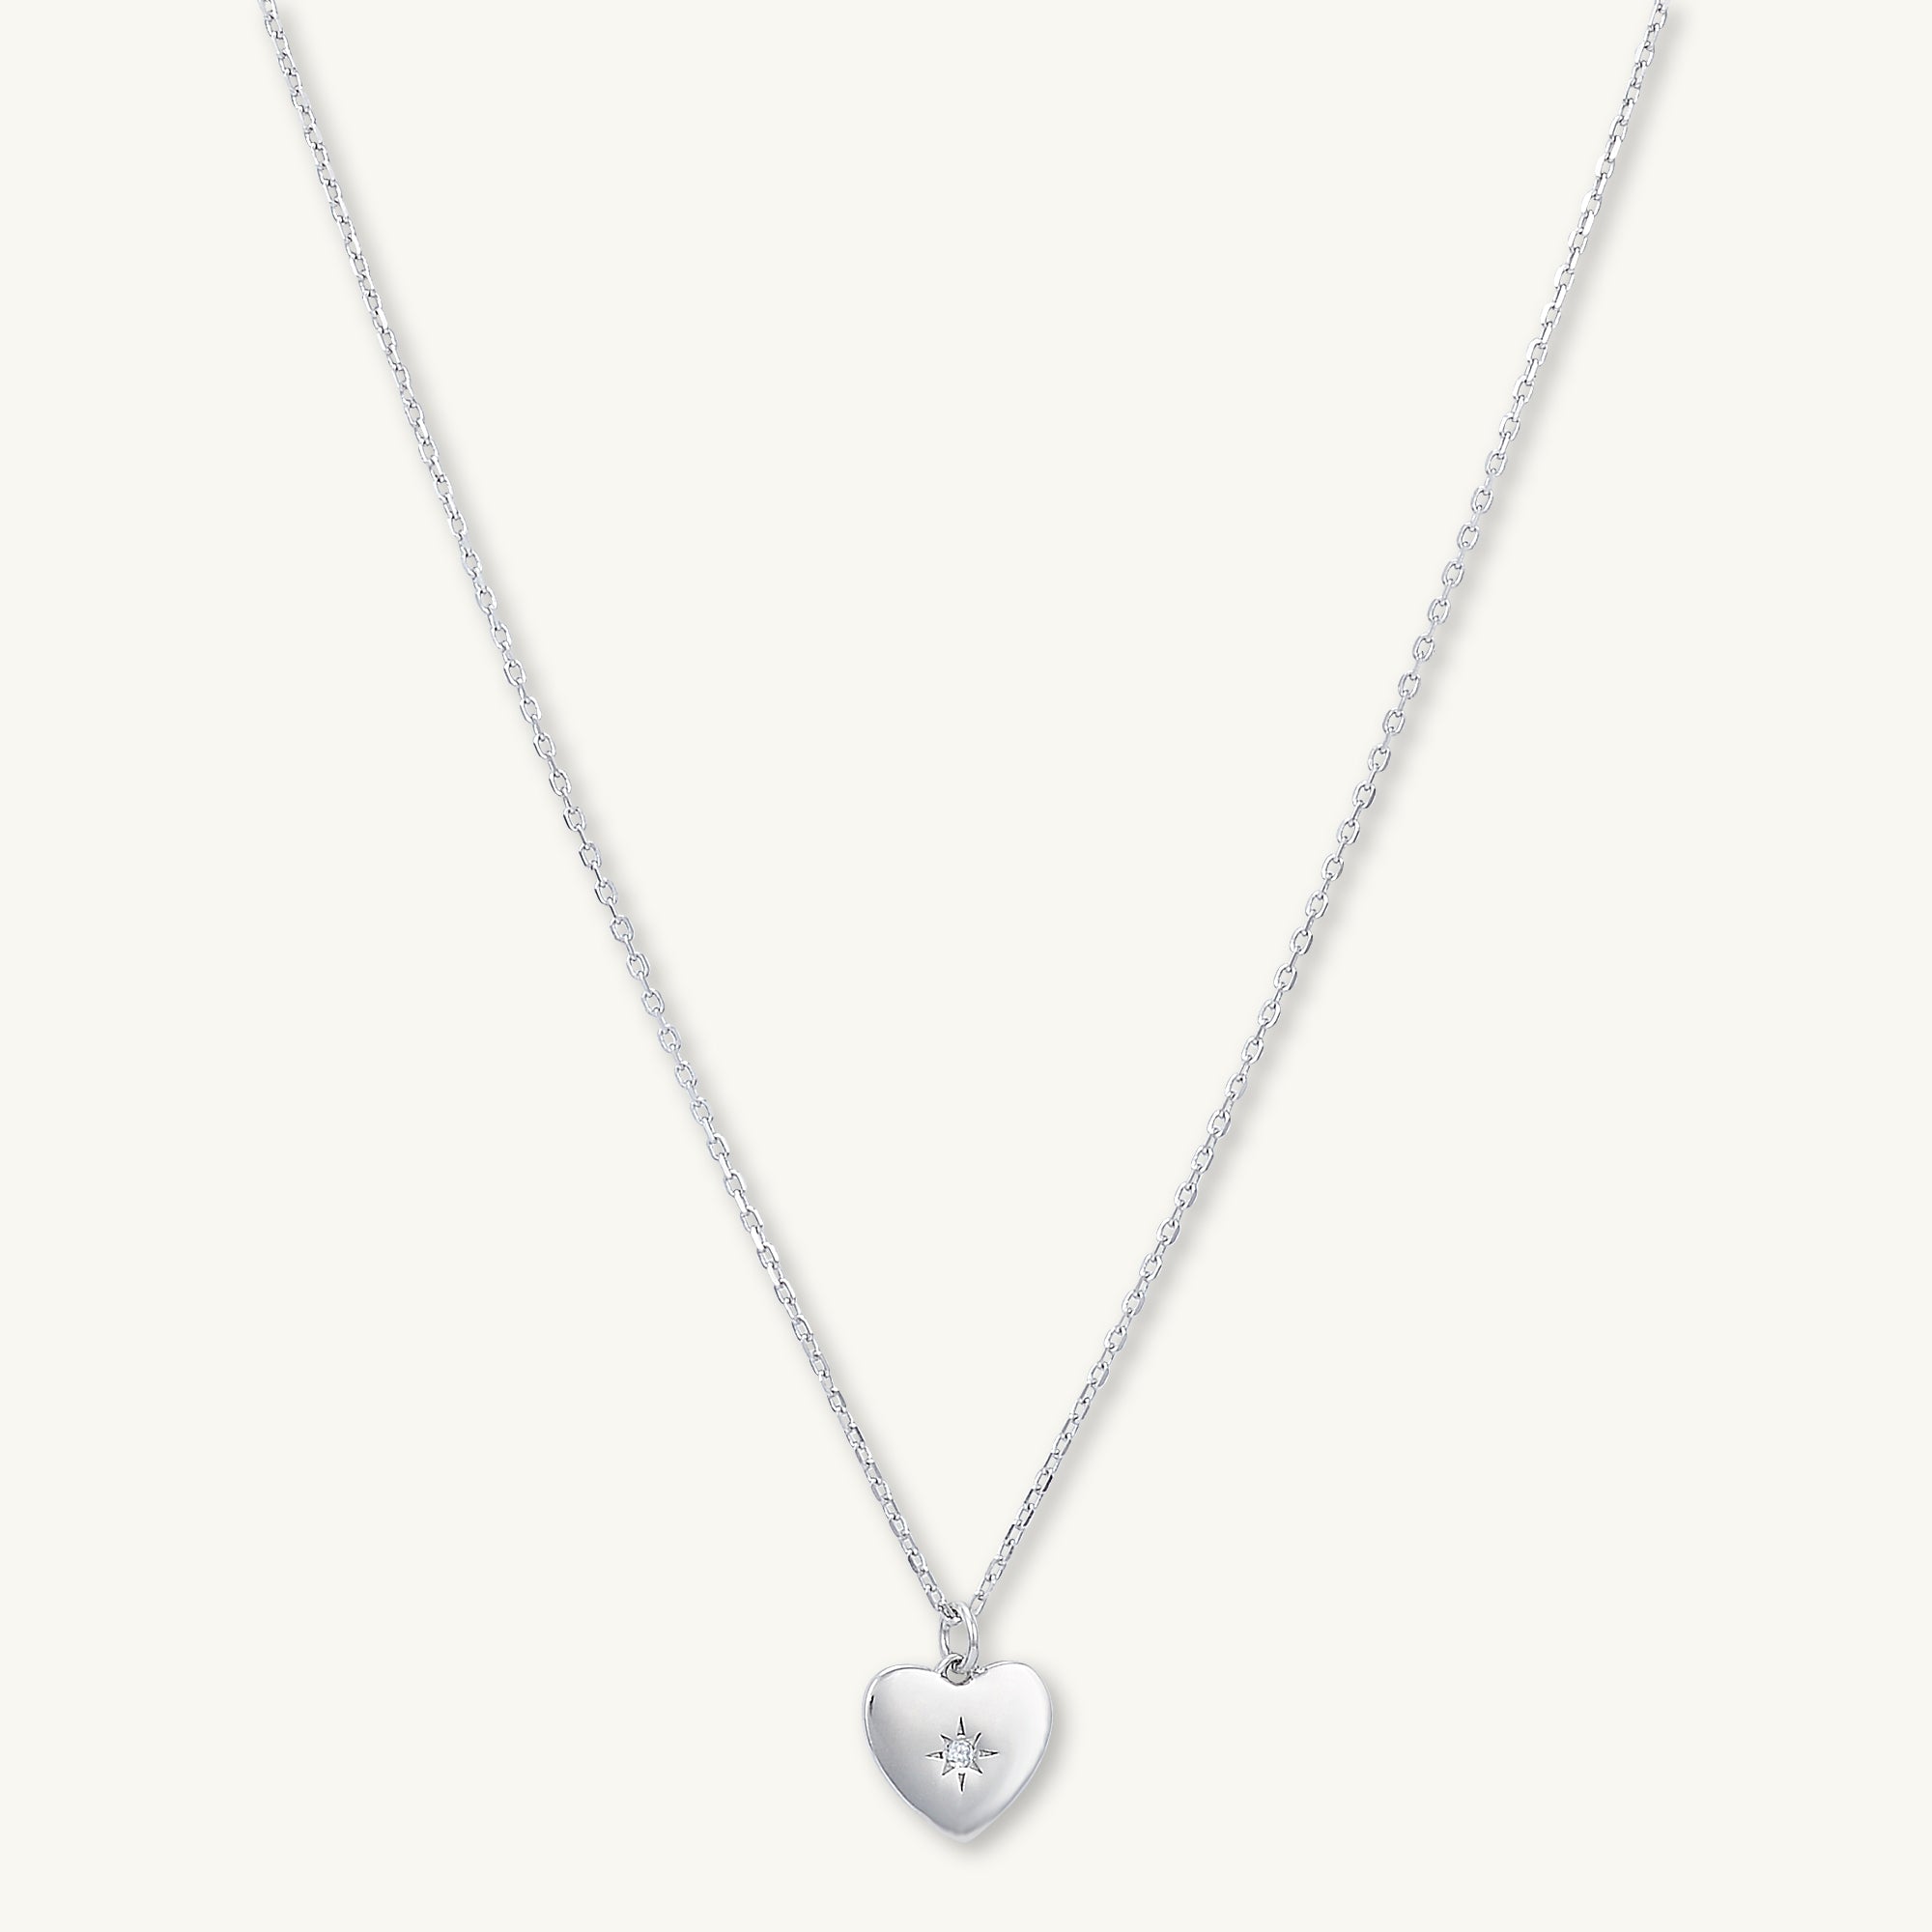 North Star Heart Necklace